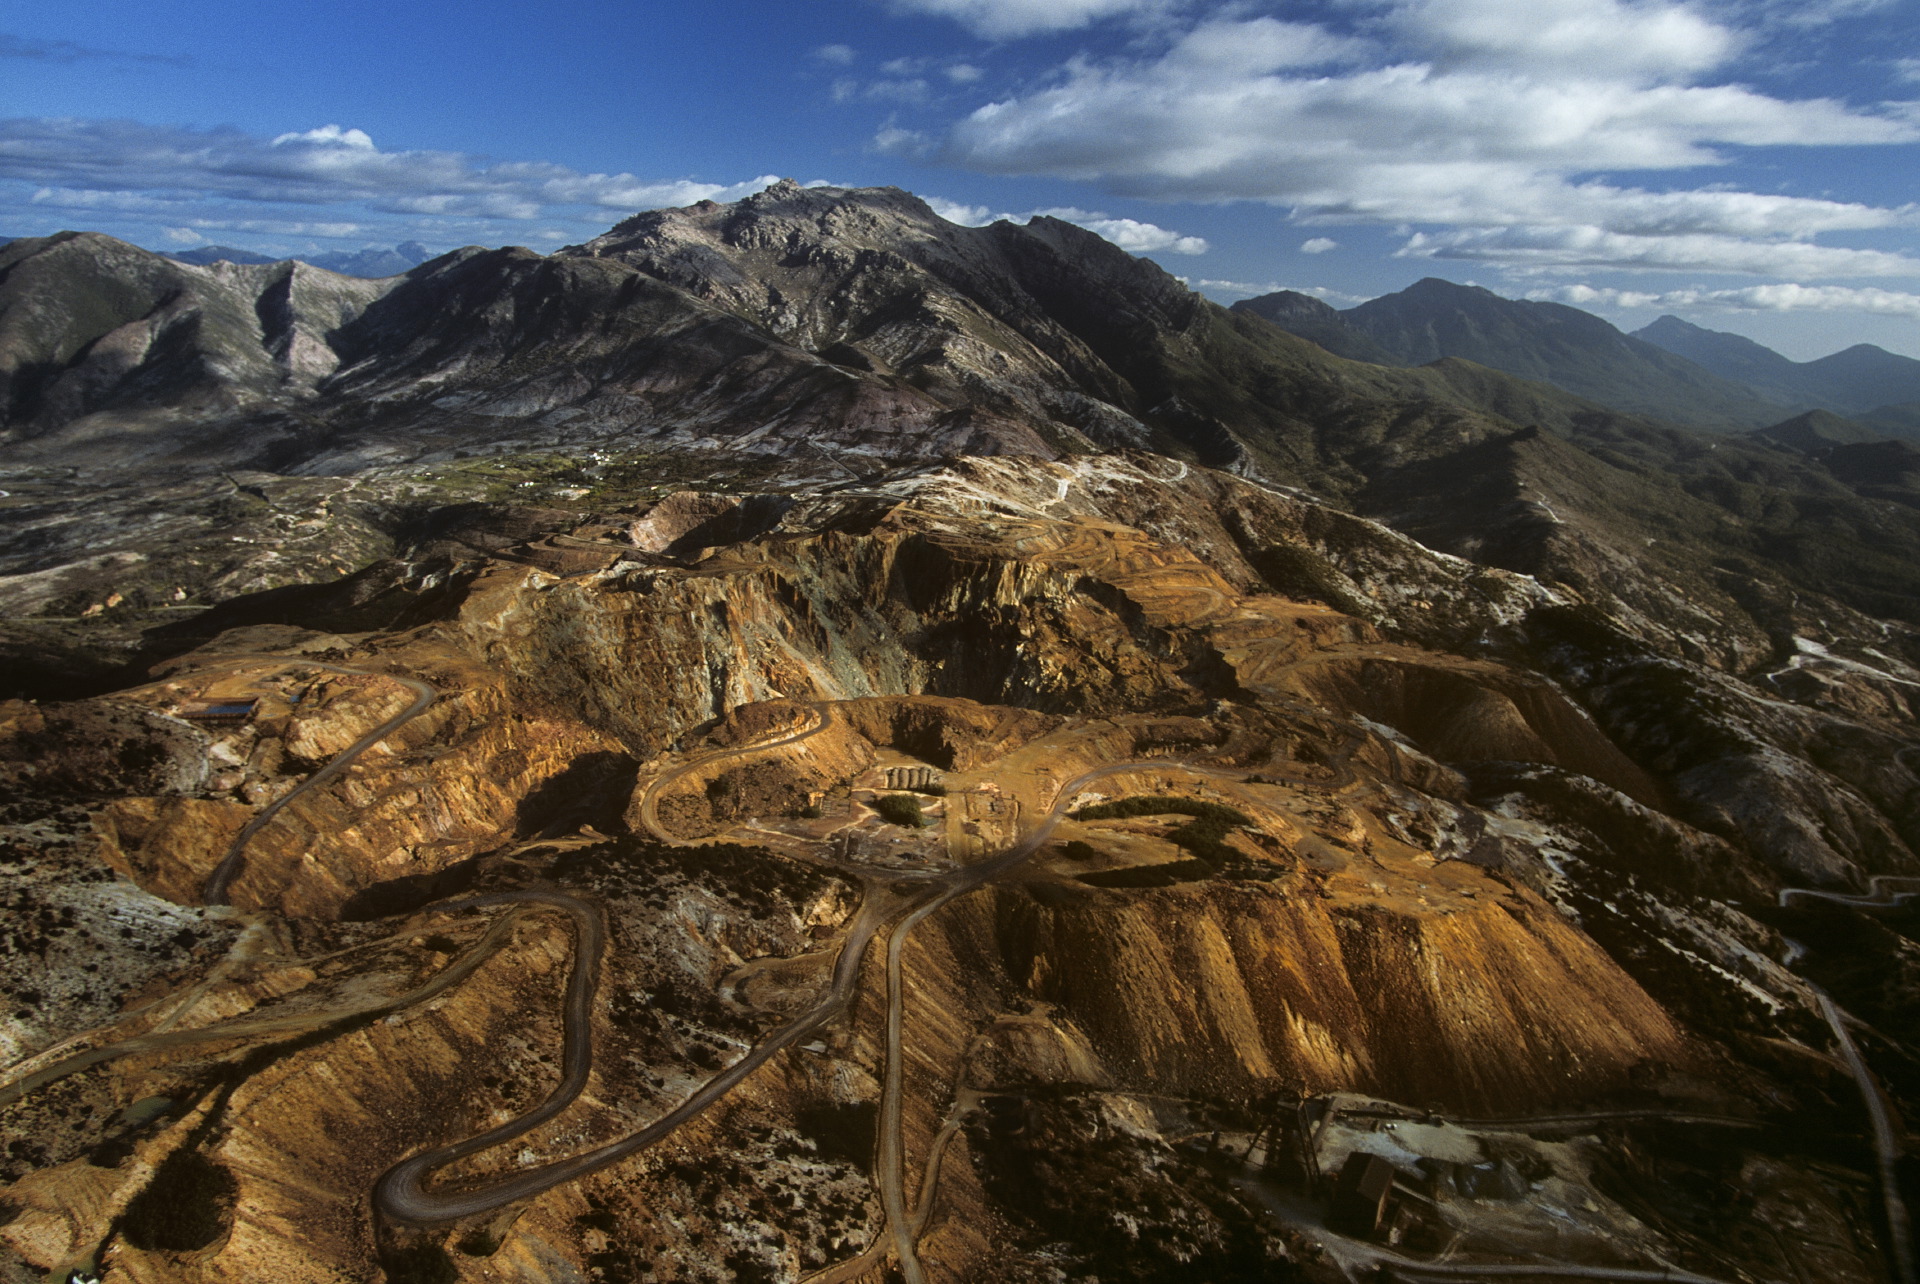  Aerial view of the Mount Lyell area near Queenstown, Tasmania, in Australia showing deep eroded gullies and bare multicolored hills due to open cut mining.  Queenstown, Tasmania  